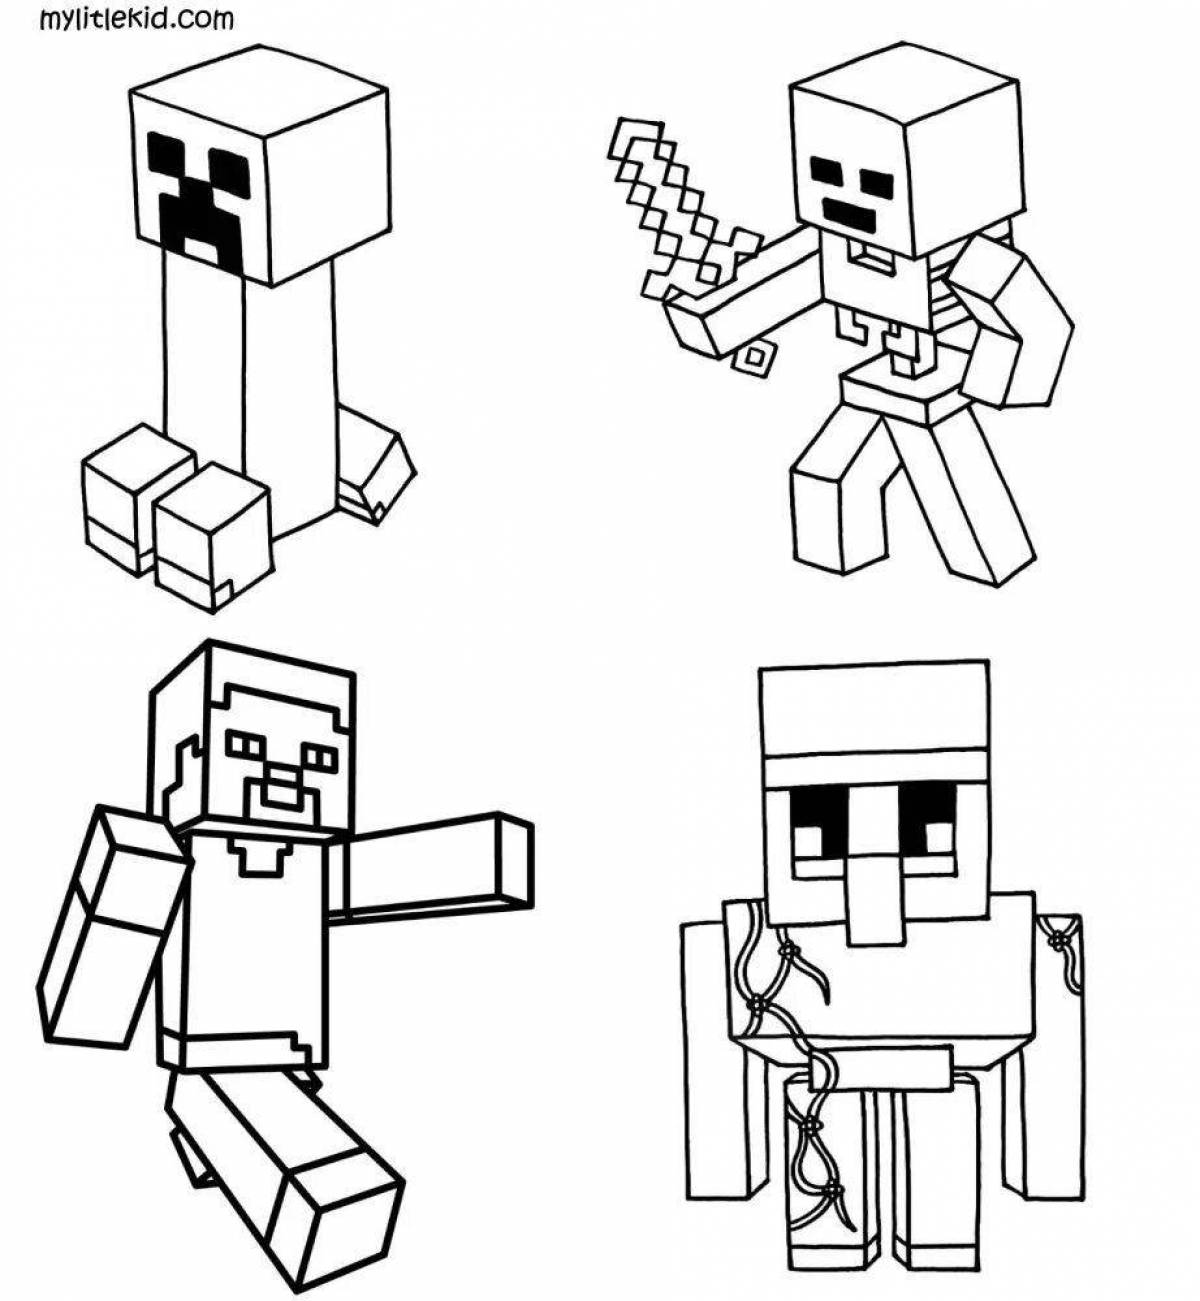 Minecraft man coloring page with colorful strokes